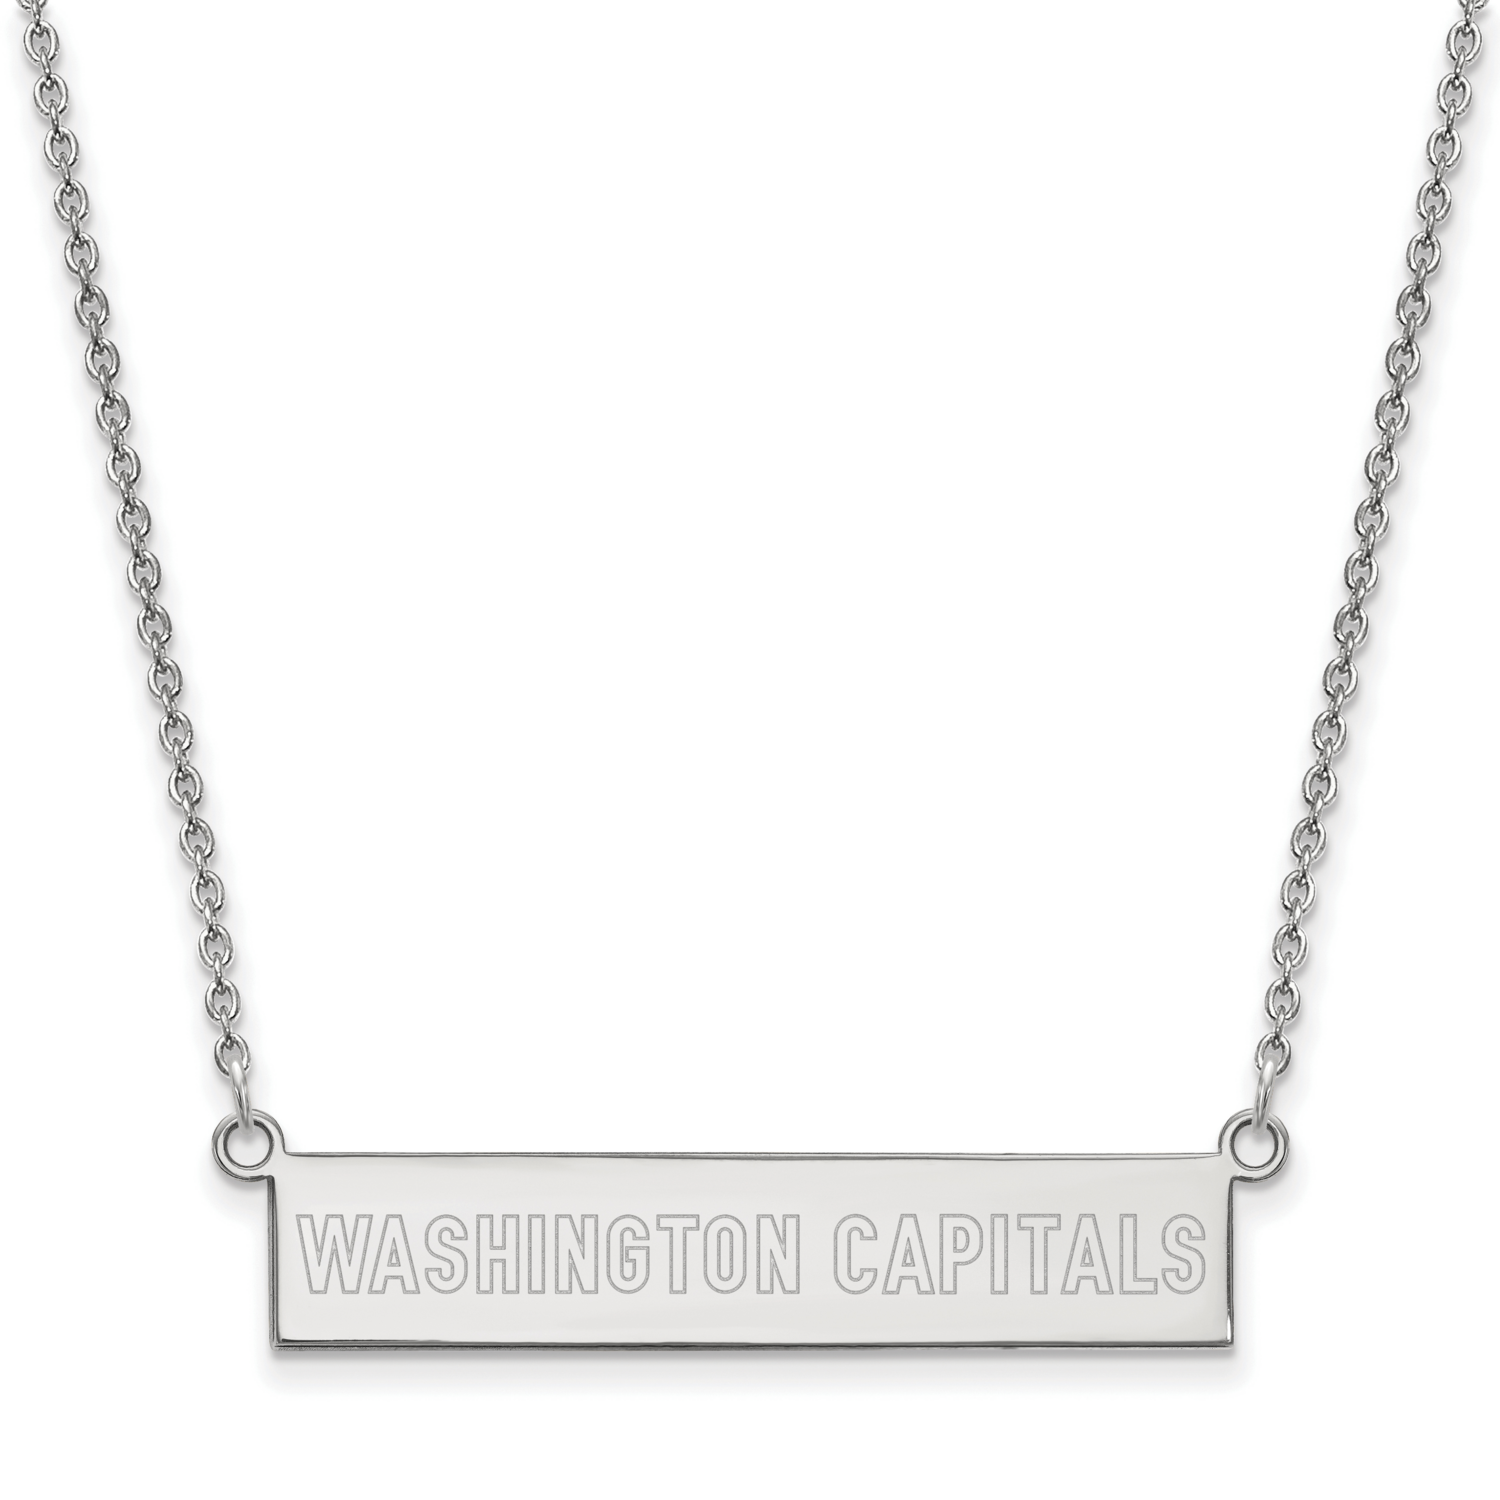 Washington Capitals Small Bar Necklace Sterling Silver Rhodium-plated SS034CAP-18